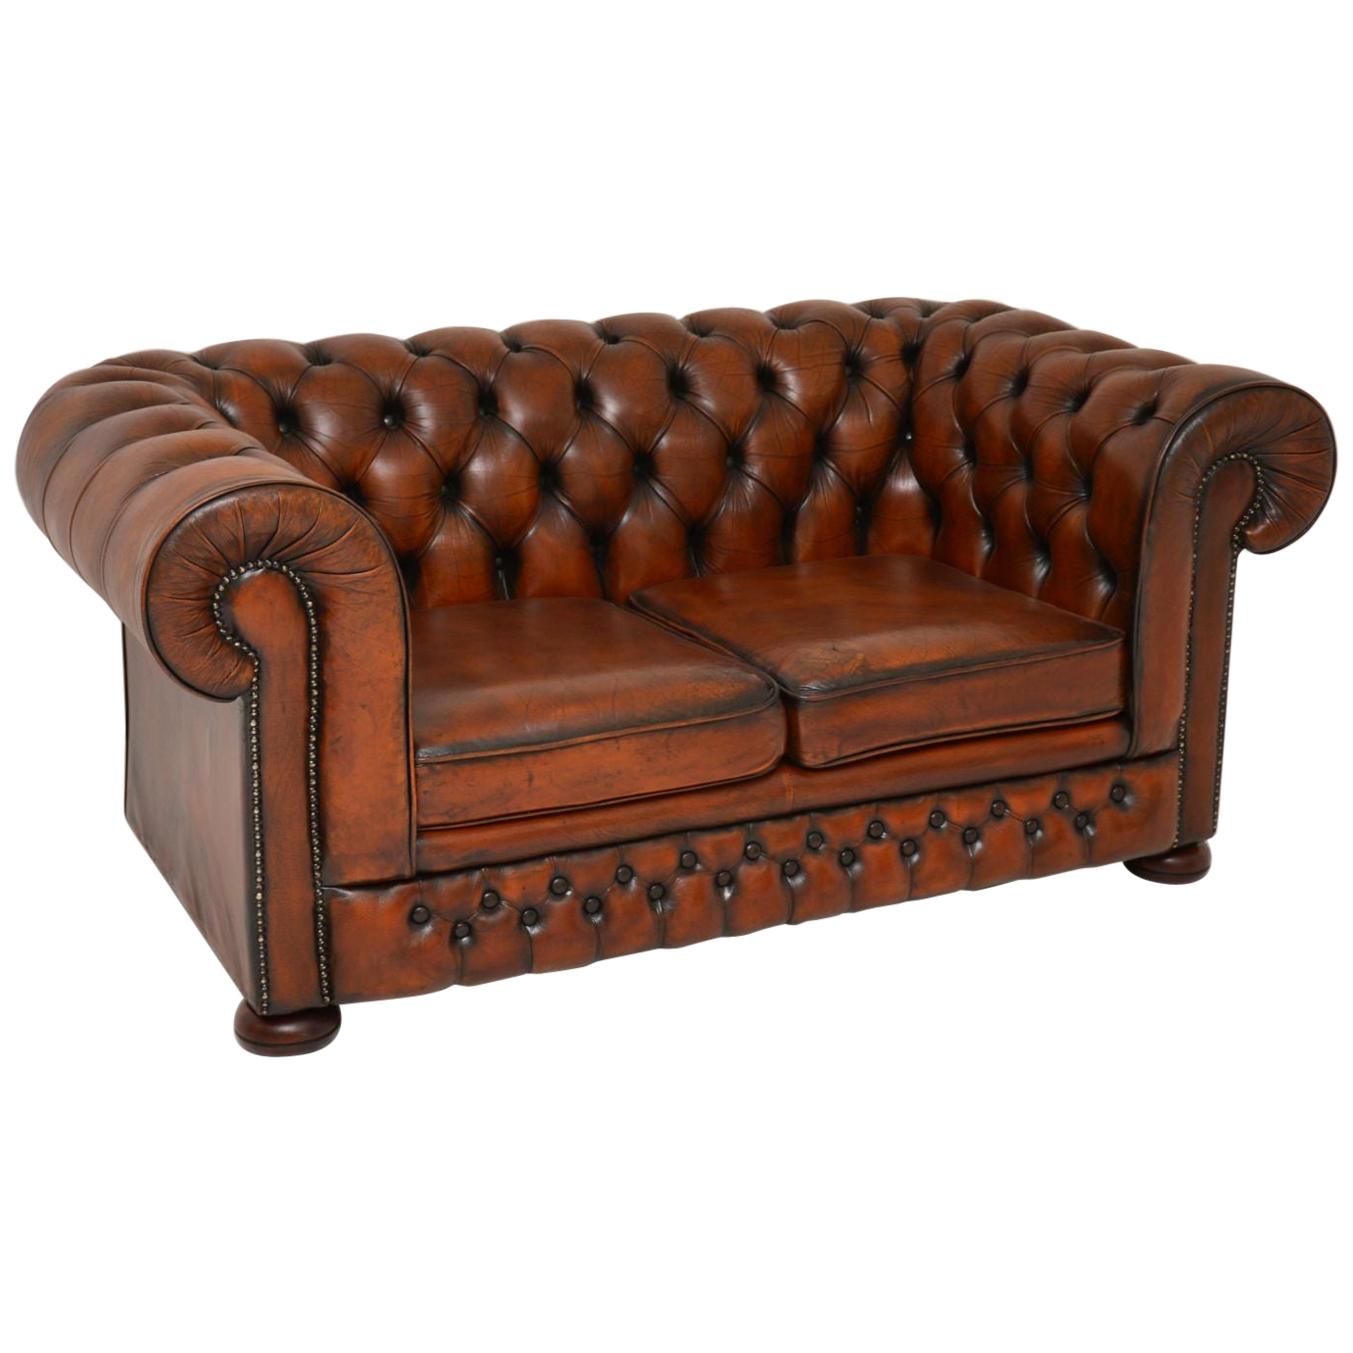 Antique Victorian Style Leather 2-Seat Chesterfield Sofa